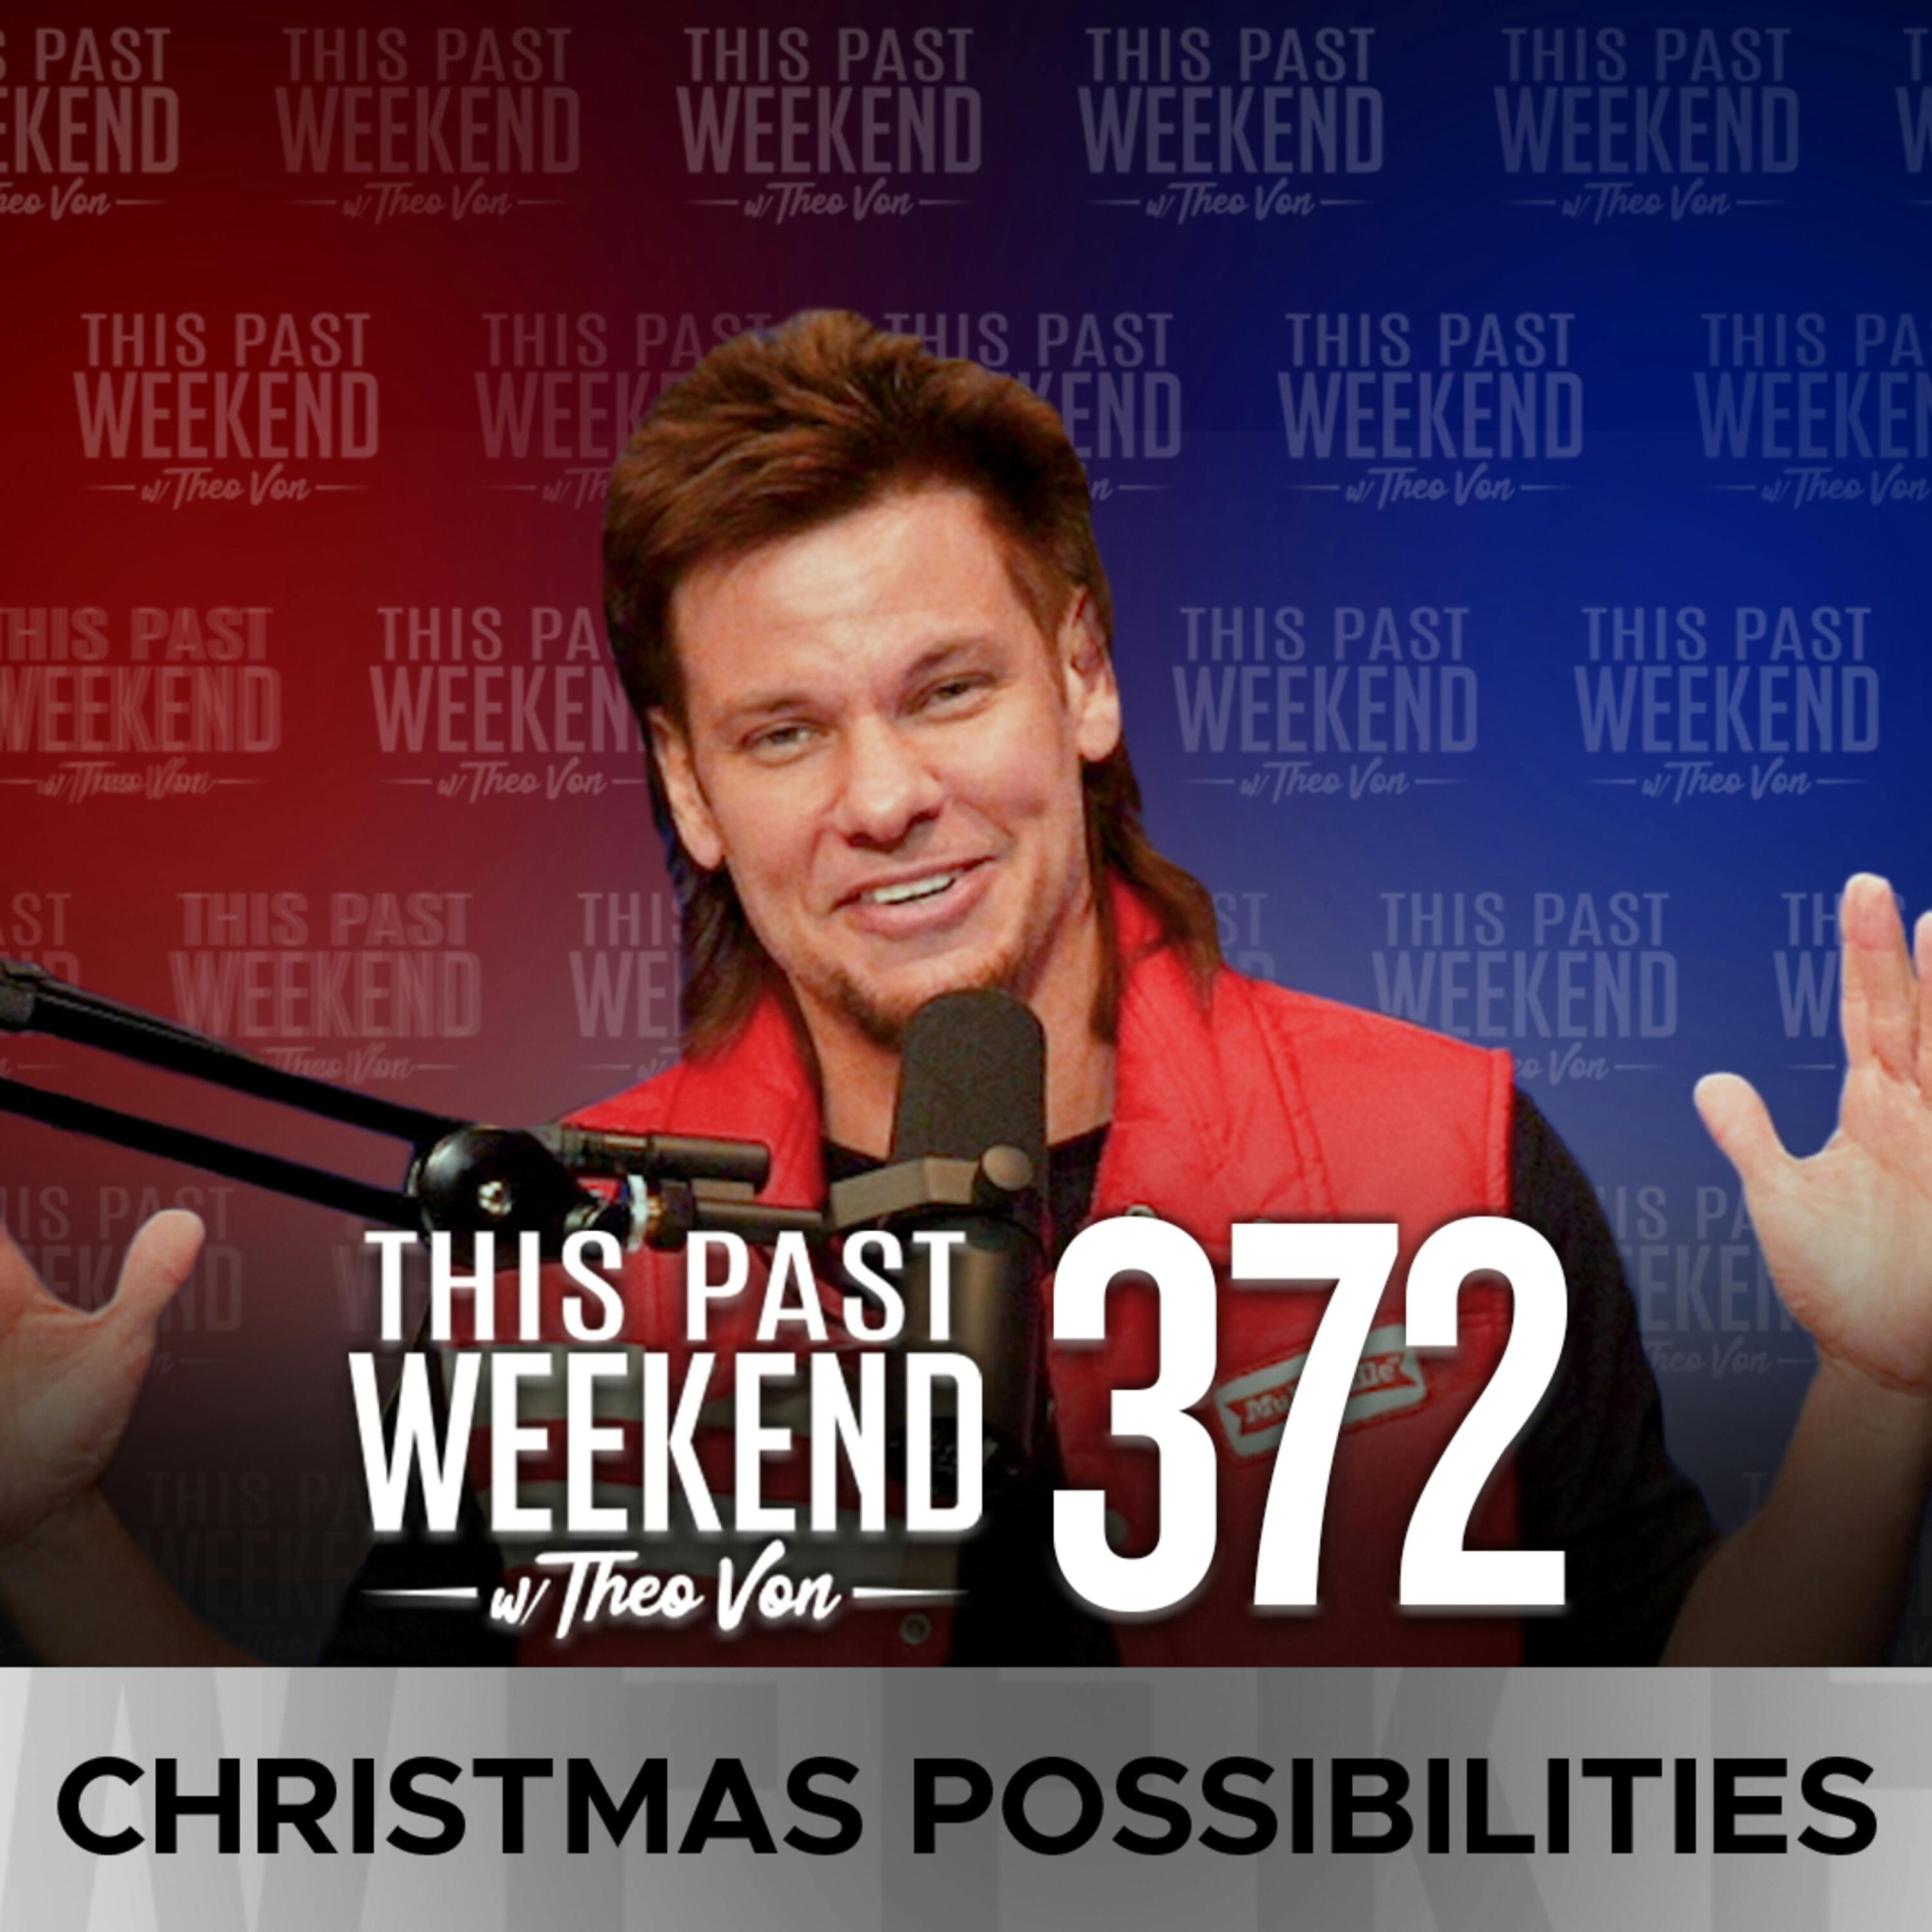 E372 Christmas Possibilities by Theo Von